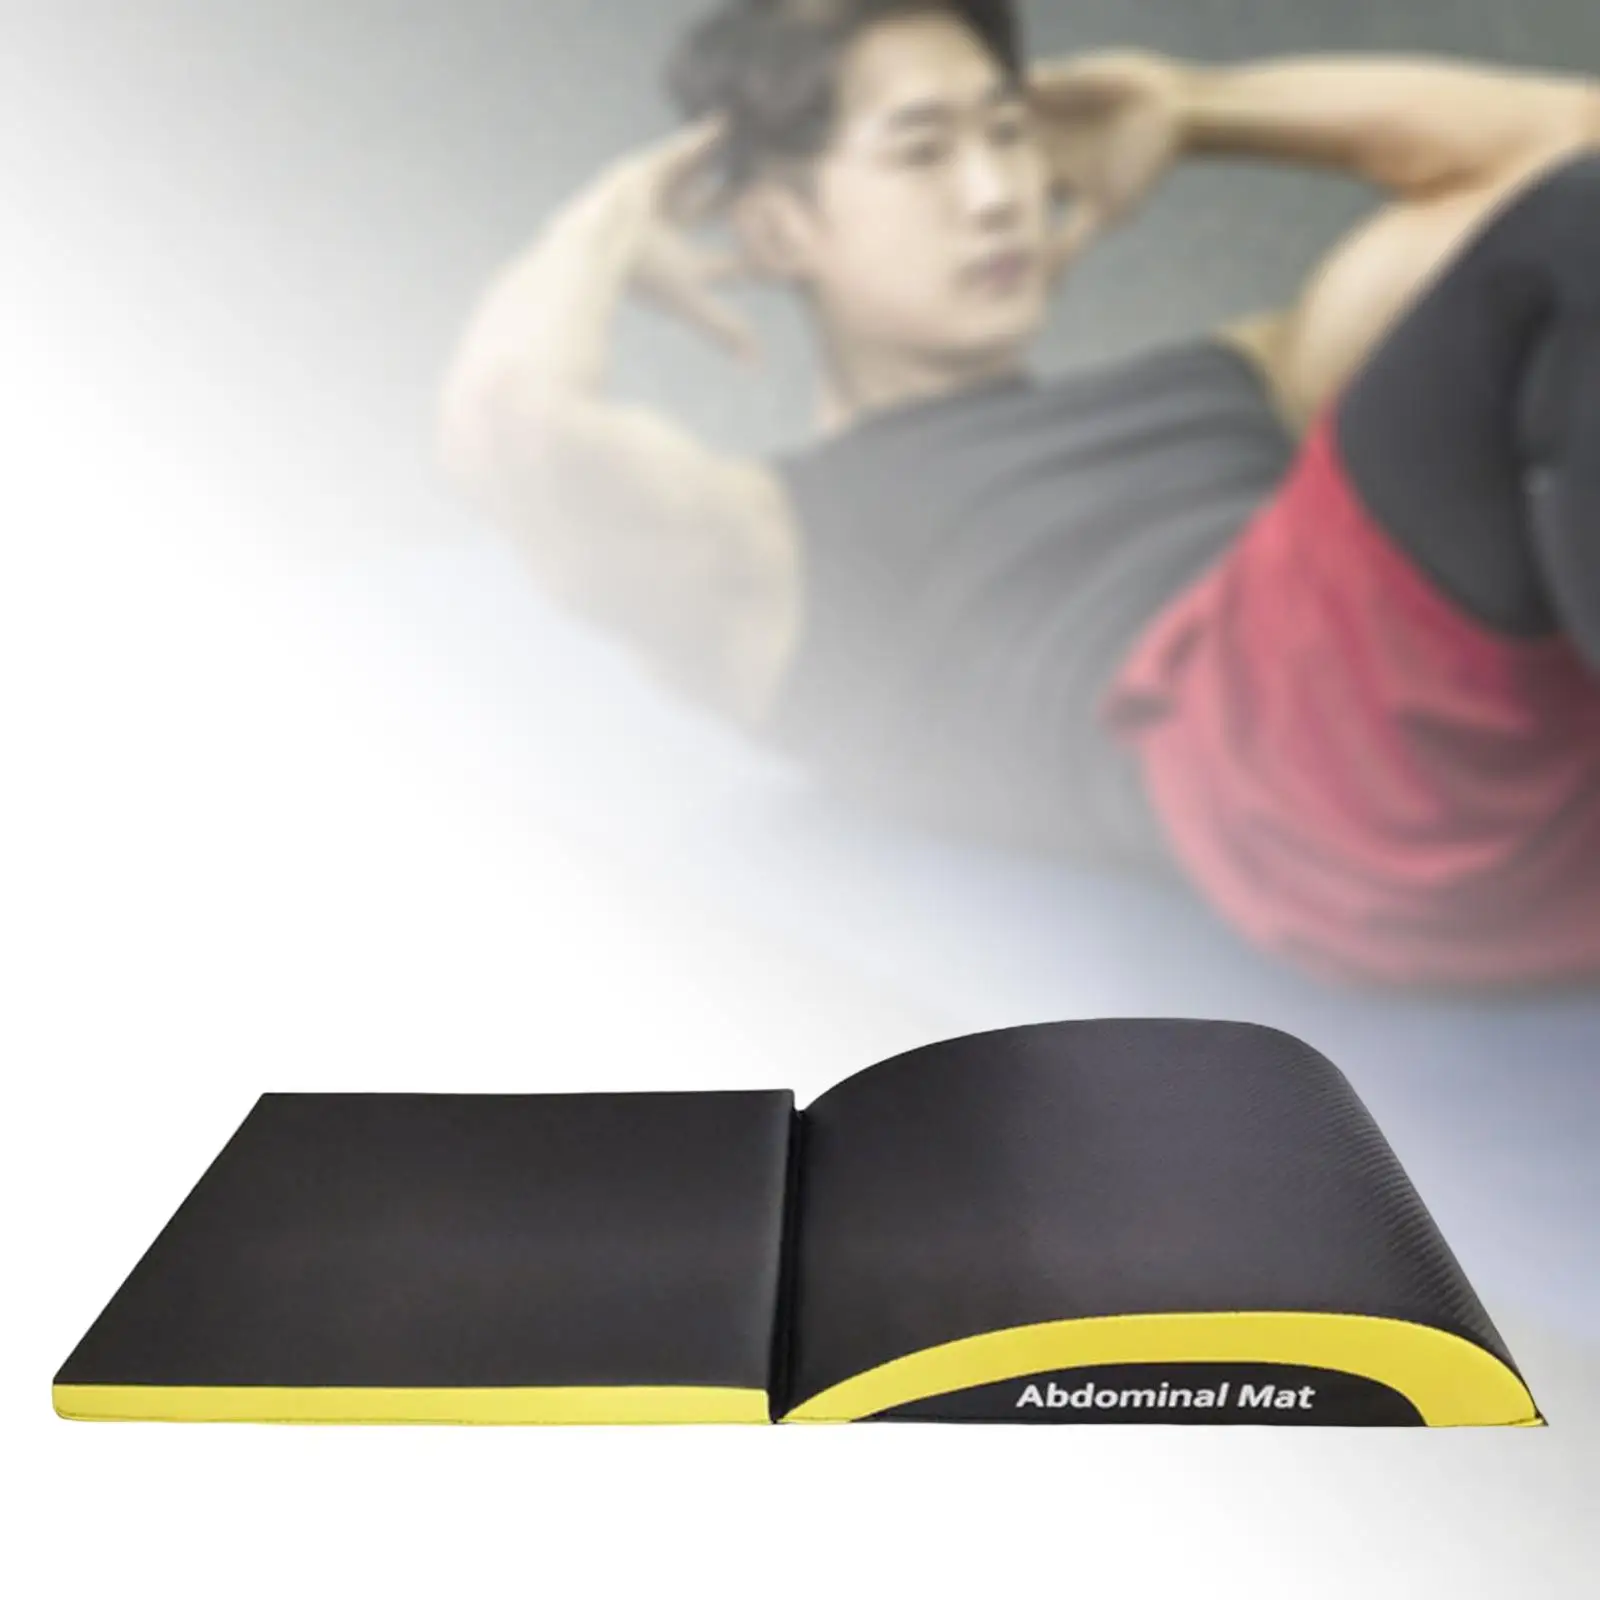 Portable Ab Exercise Mat Abdominal Core Trainer Pad Workout Back Lumbar Support Home Gym Situp Tailbone Protector Folded Cushion